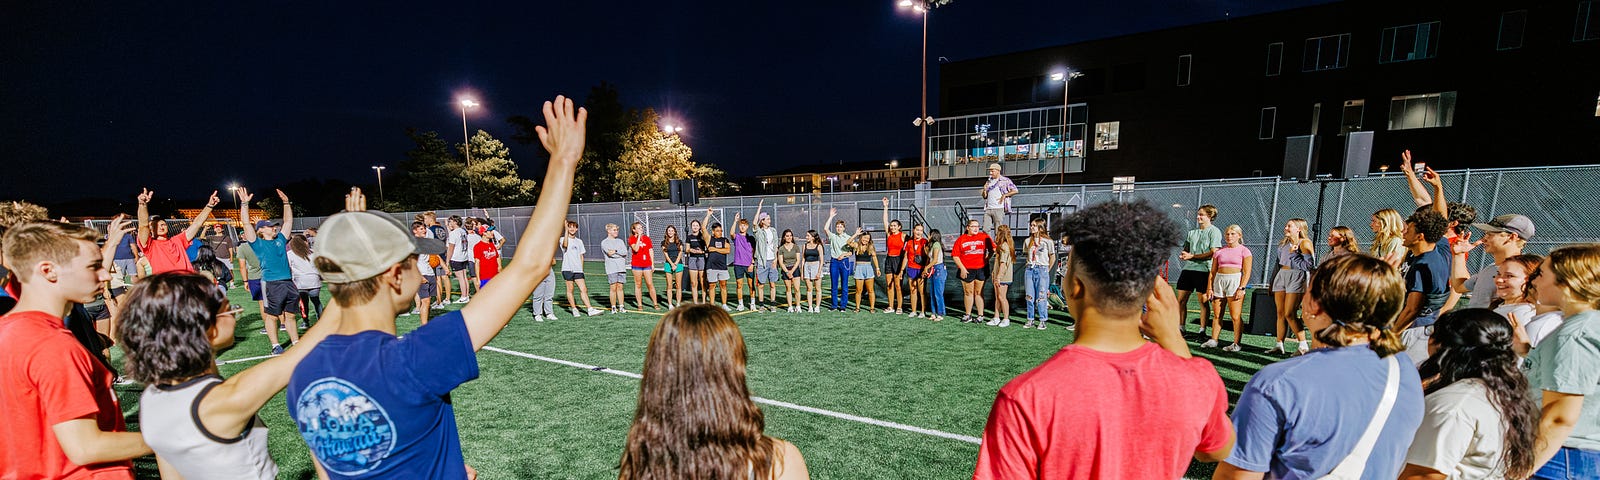 Students raise their hands during an ice breaker game at the Playfair